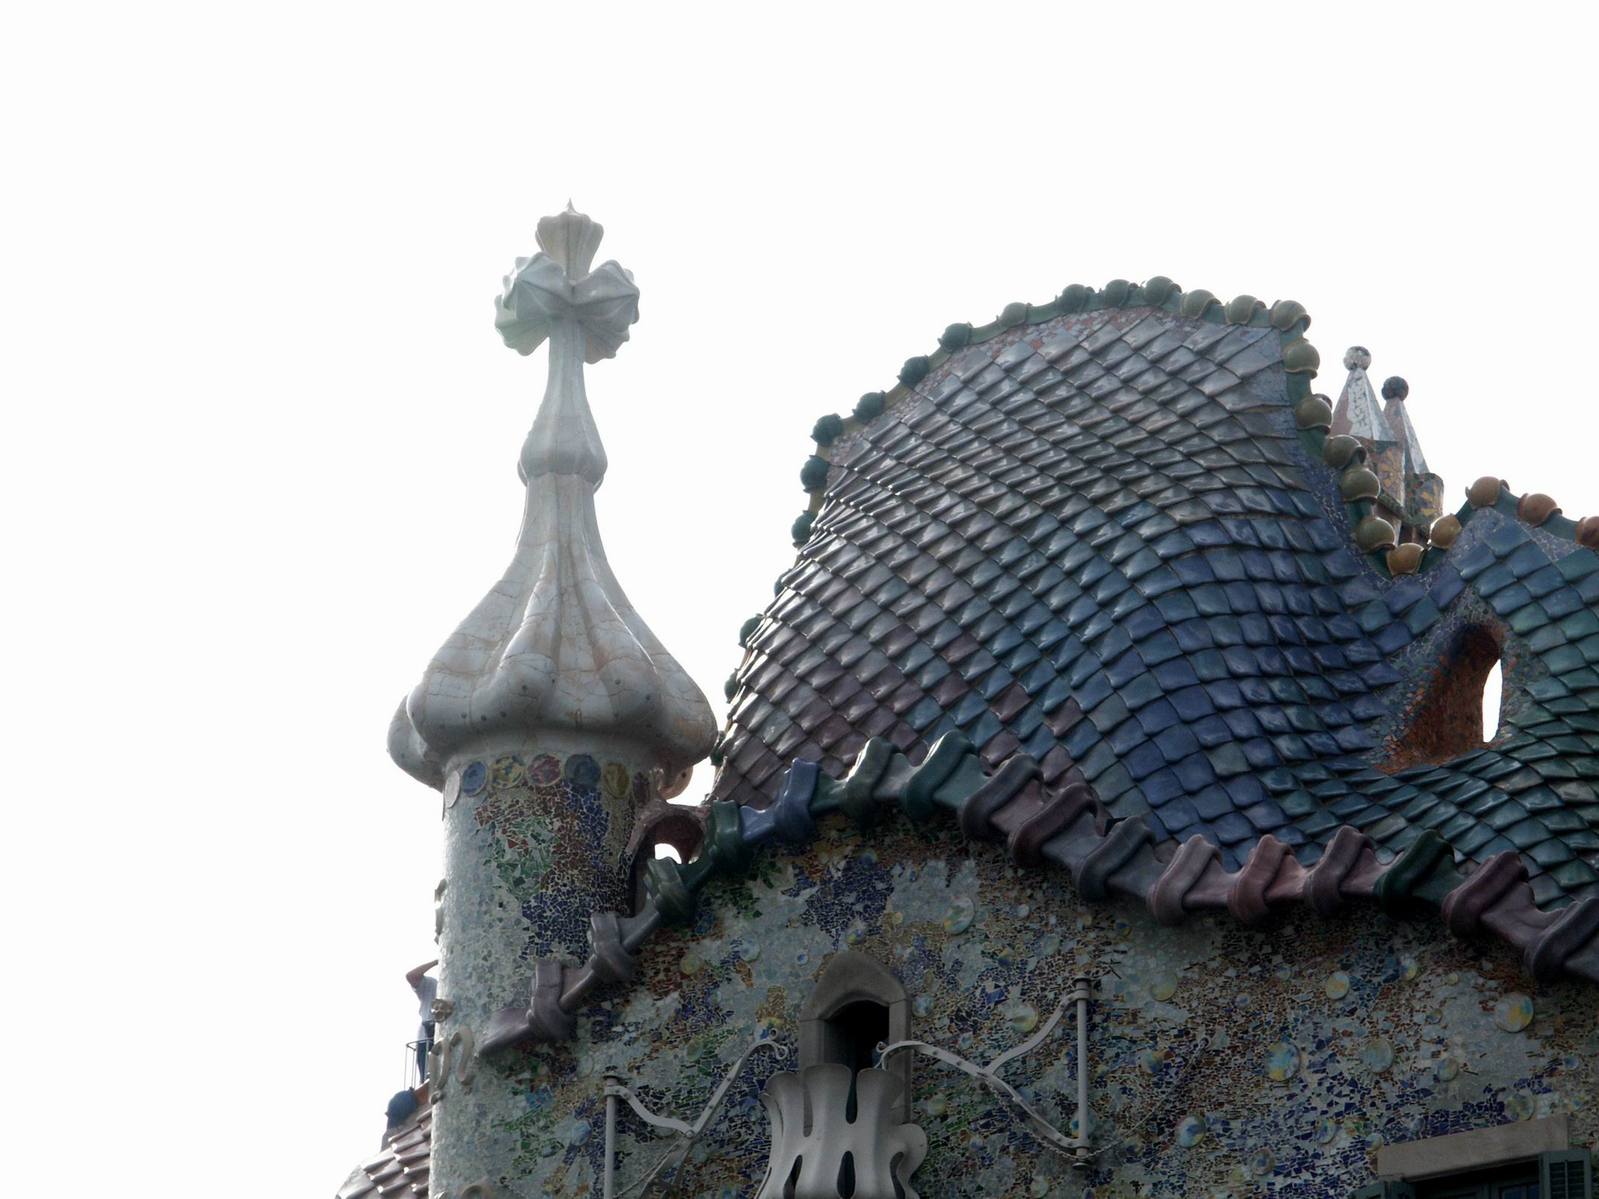 the roof is made of ceramic tiles and has an unusual roof top